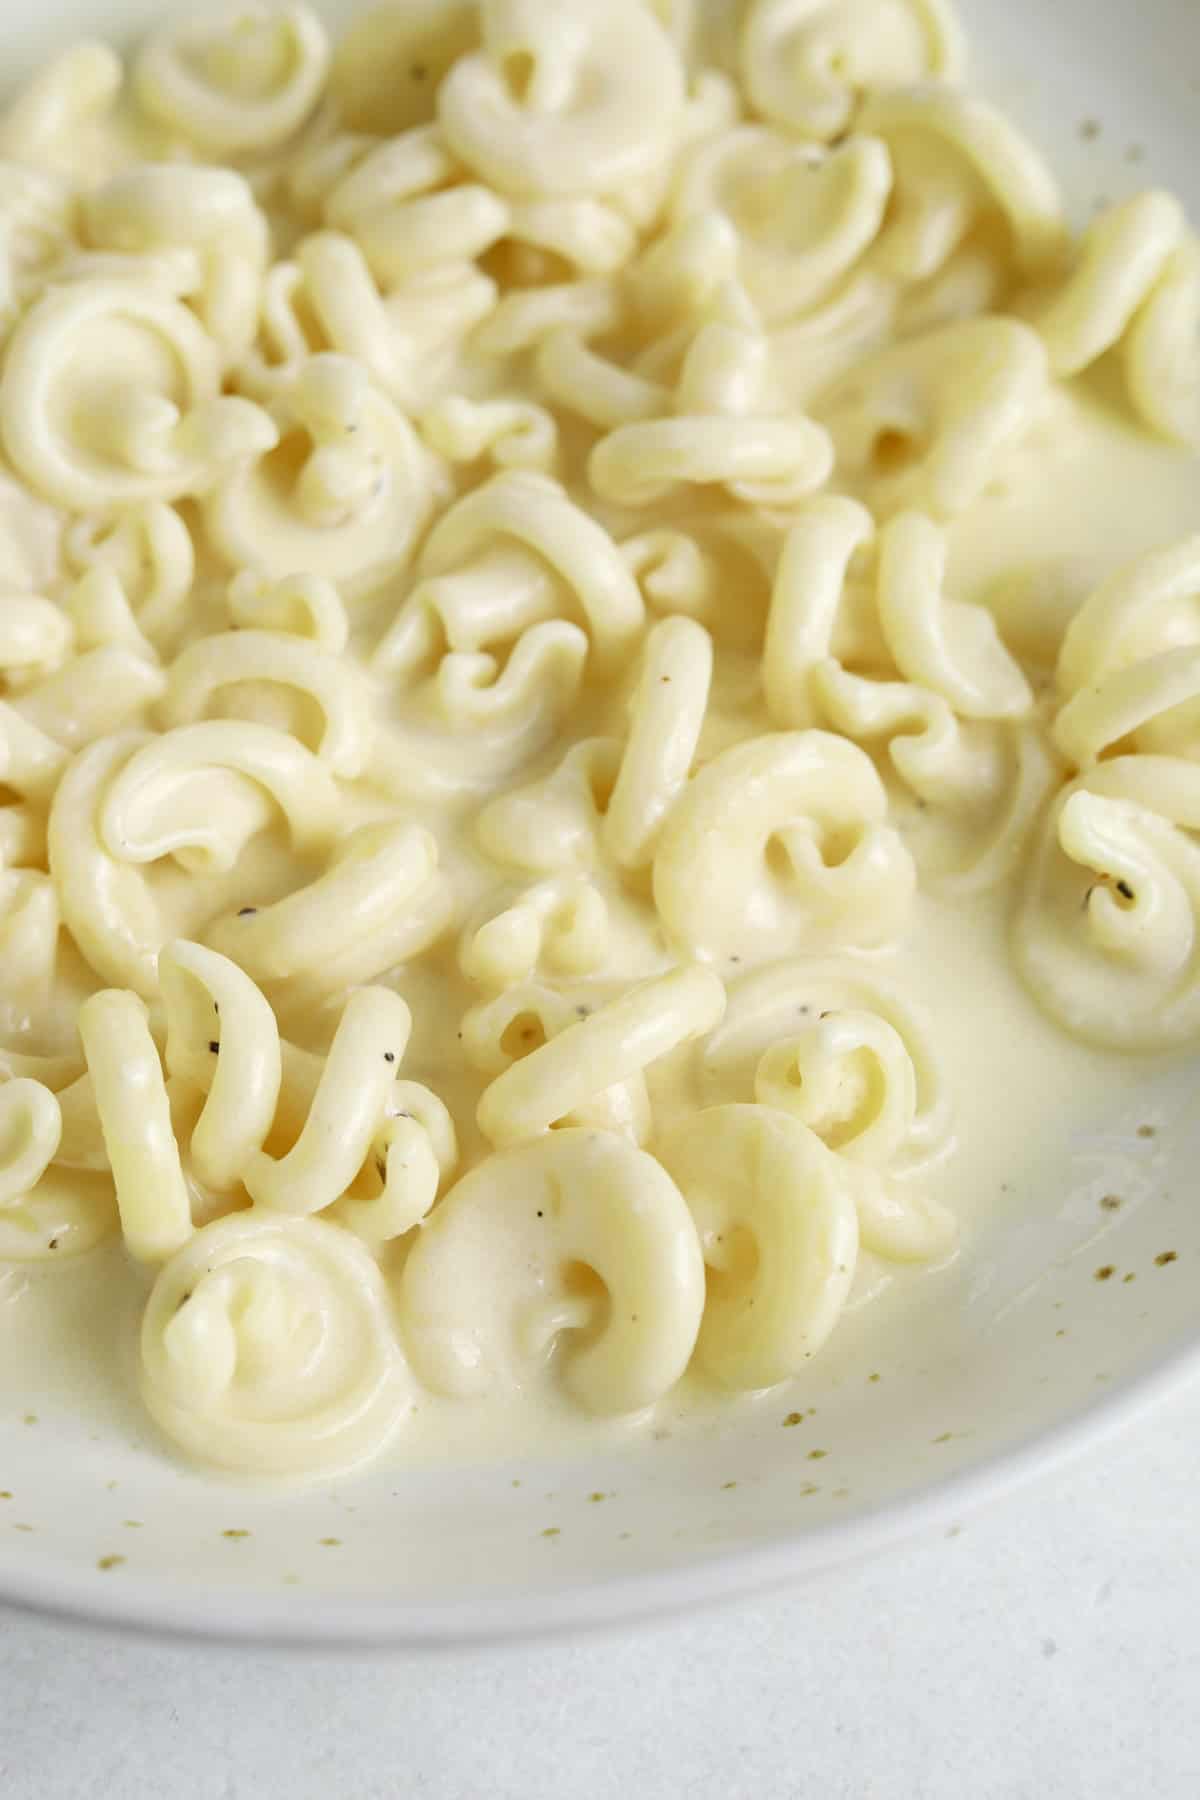 A close up image of pasta coated in creamy Alfredo sauce in a white bowl.